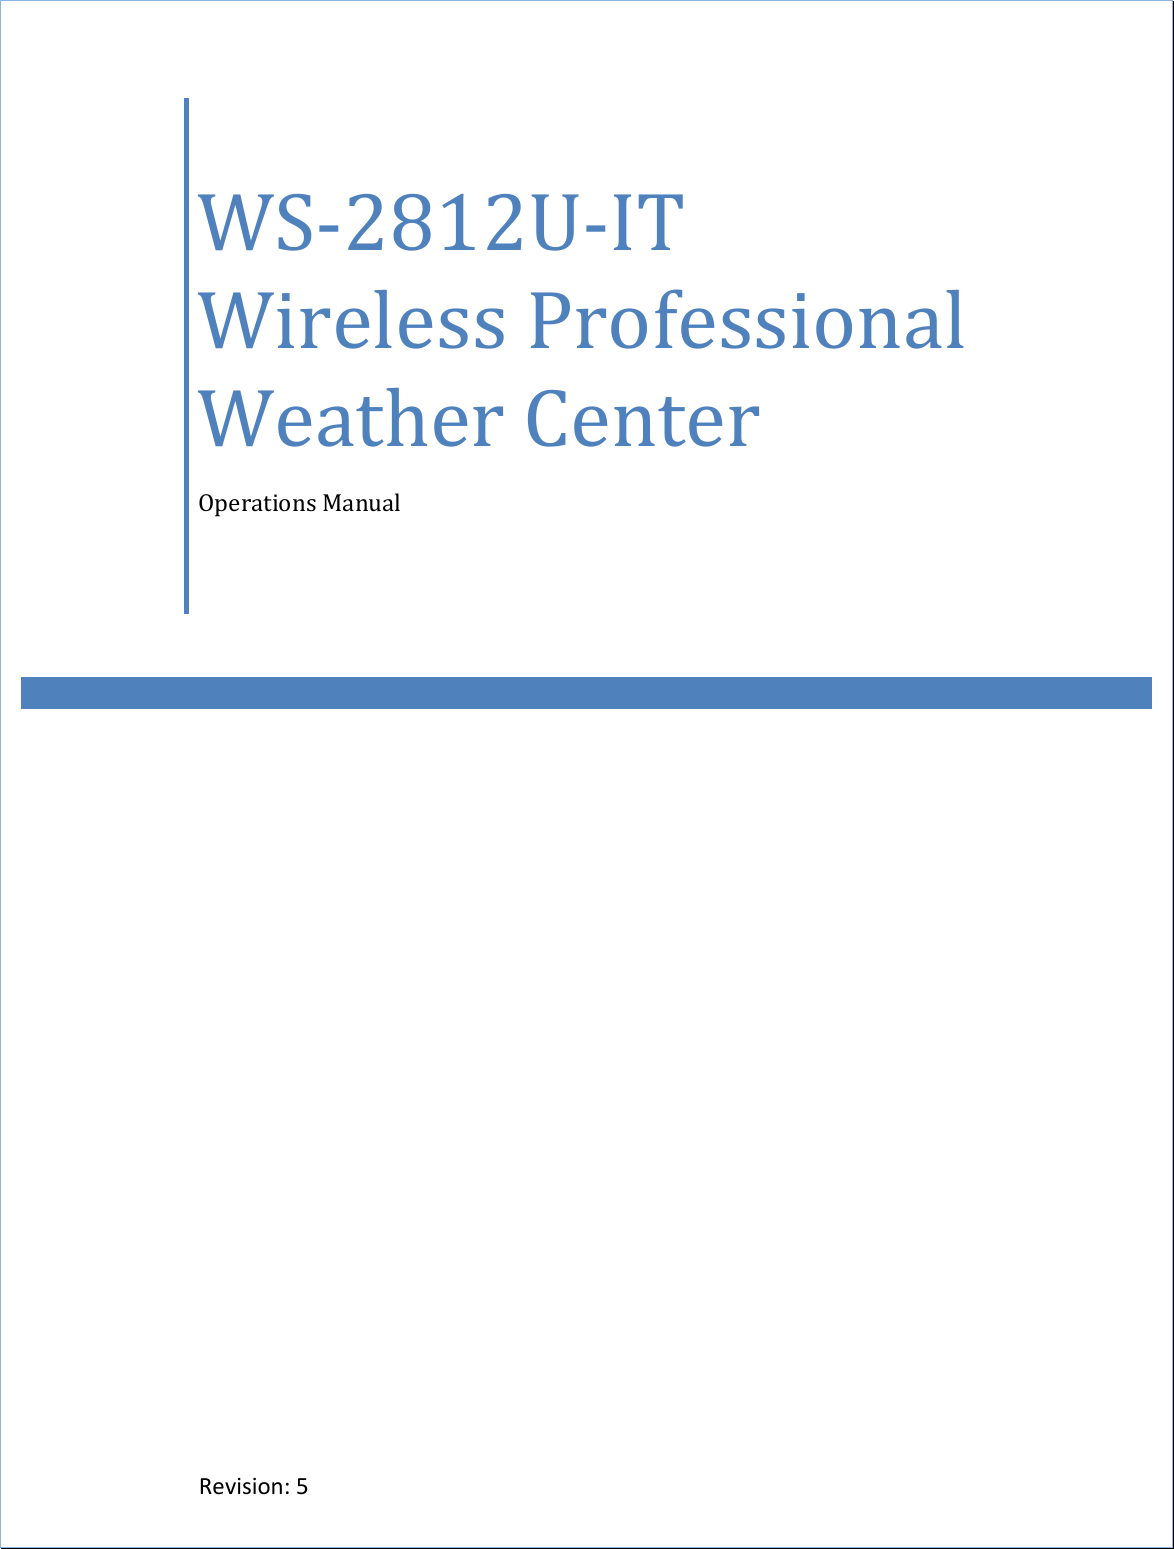                    WS-2812U-IT Wireless Professional Weather Center Operations Manual  Revision: 5 